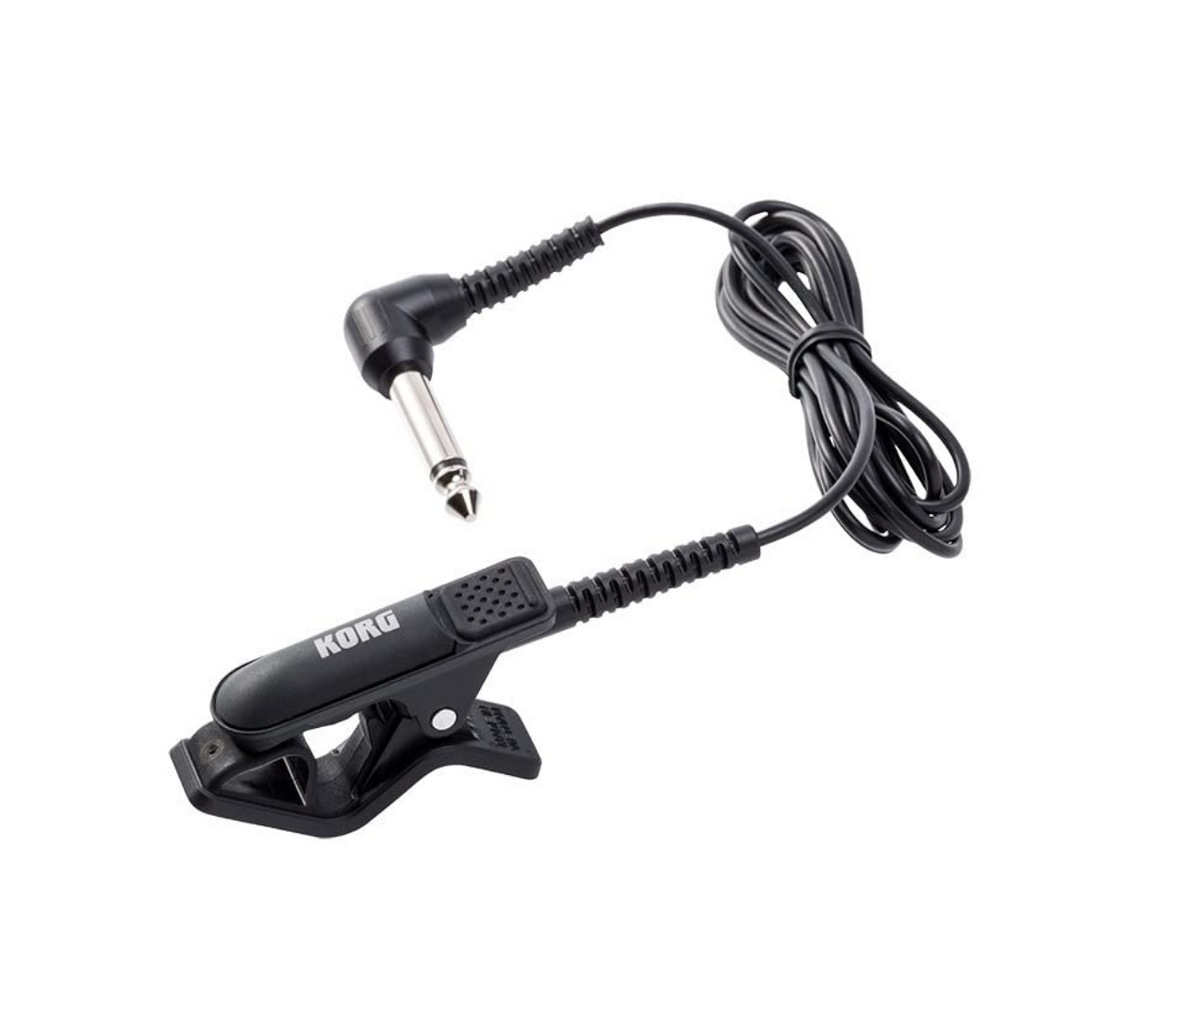 KORG CM-300-BK Best Contact Microphone Clip-type Mic for Stable Attachment to a Variety of Instruments with High-precision Tuning